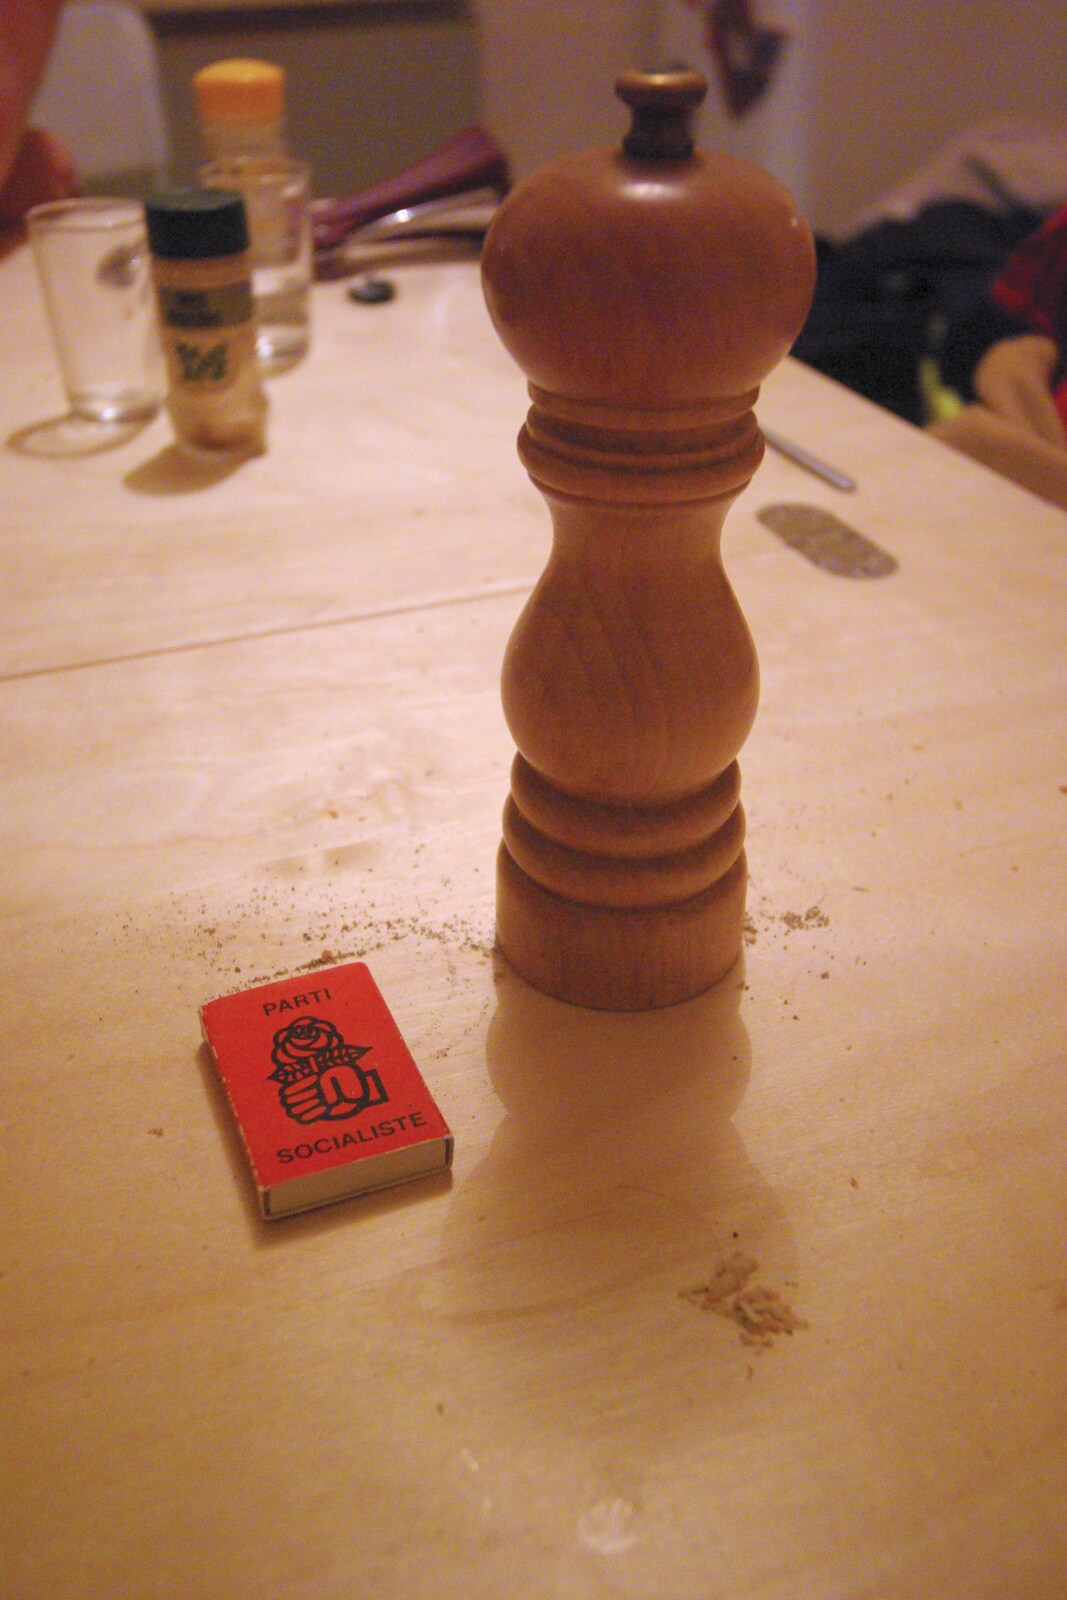 Socialist matches and a pepper grinder from A Swiss Fondue with Bus-Stop Rachel and Sam, Gwydir Street, Cambridge - 1st March 2007